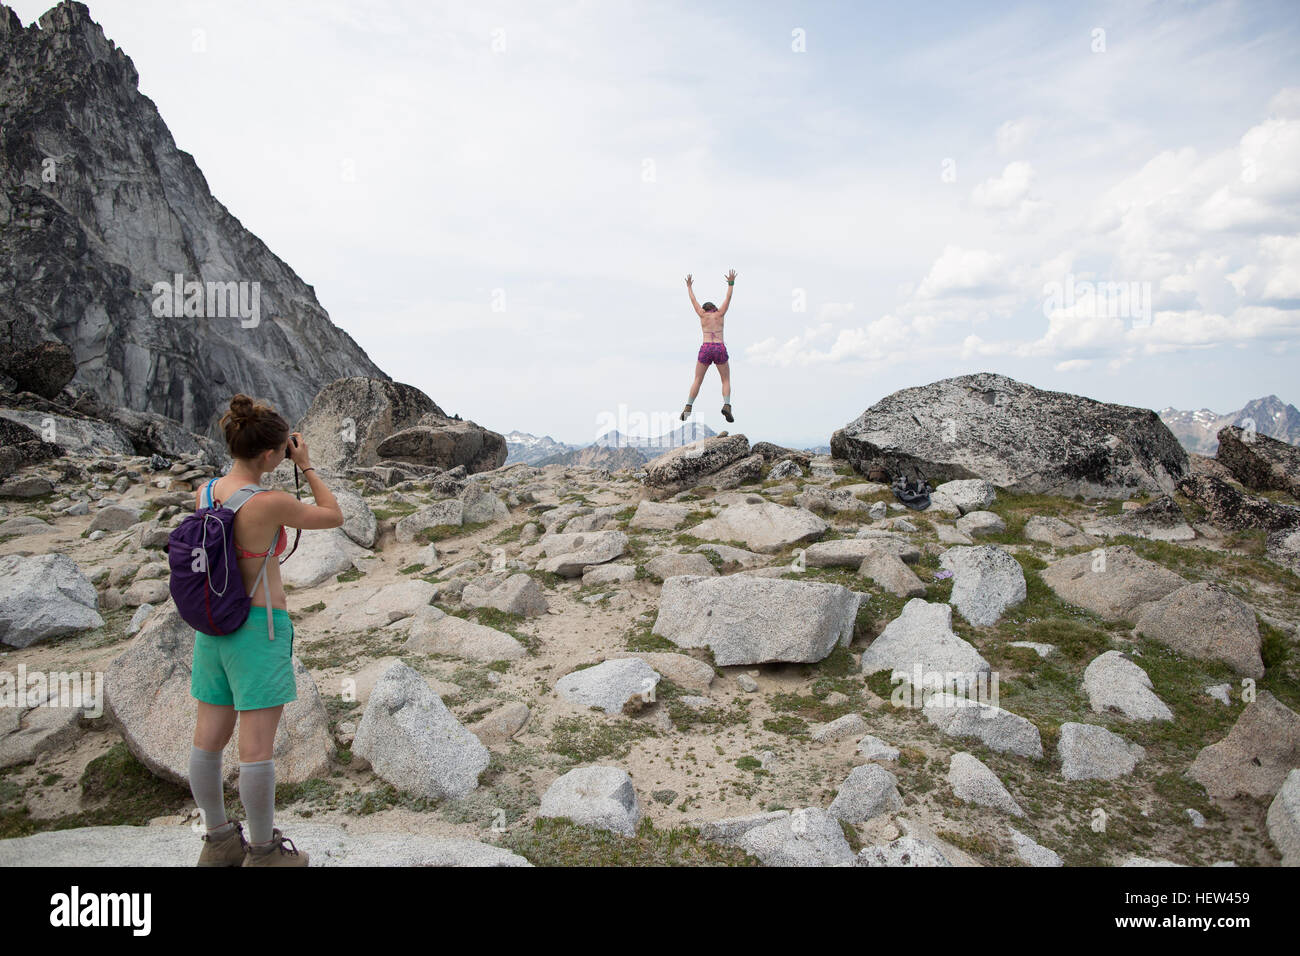 Young woman photographing friend, The Enchantments, Alpine Lakes Wilderness, Washington, USA Stock Photo